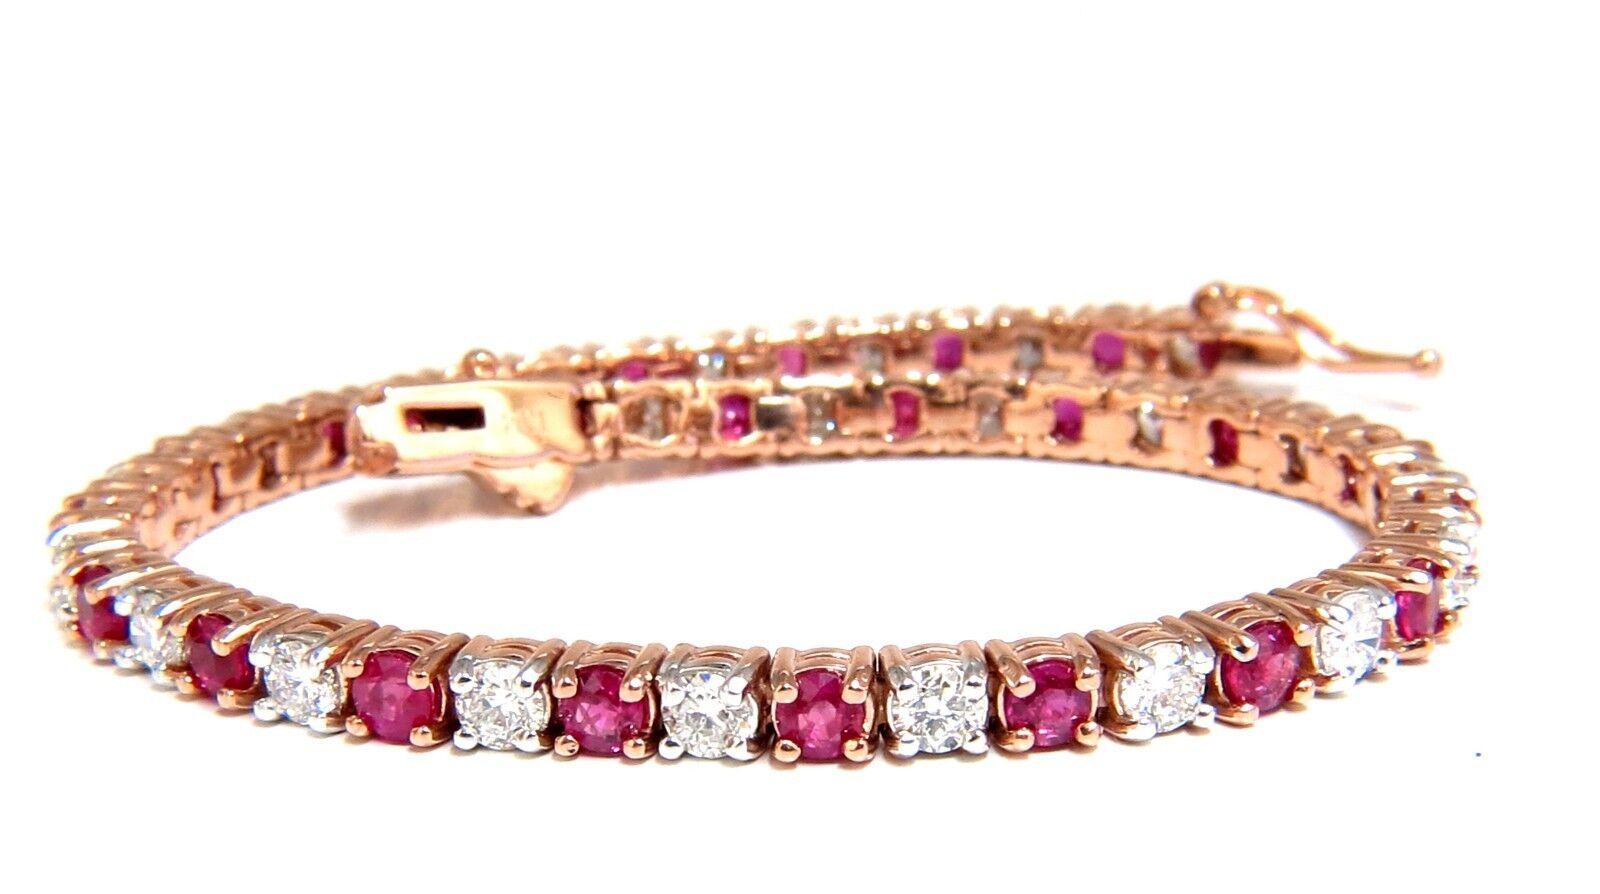 Ruby & Classic Alternating Tennis.

3.74ct. Natural ruby bracelet.

Rounds, full cuts 

Clean clarity

Transparent & Vivid Reds.

Average 3.5mm each

2.77ct Natural Diamonds

Rounds & full cuts

Vs-s clarity G-color

14kt. pink gold 

14.1 Grams.

7